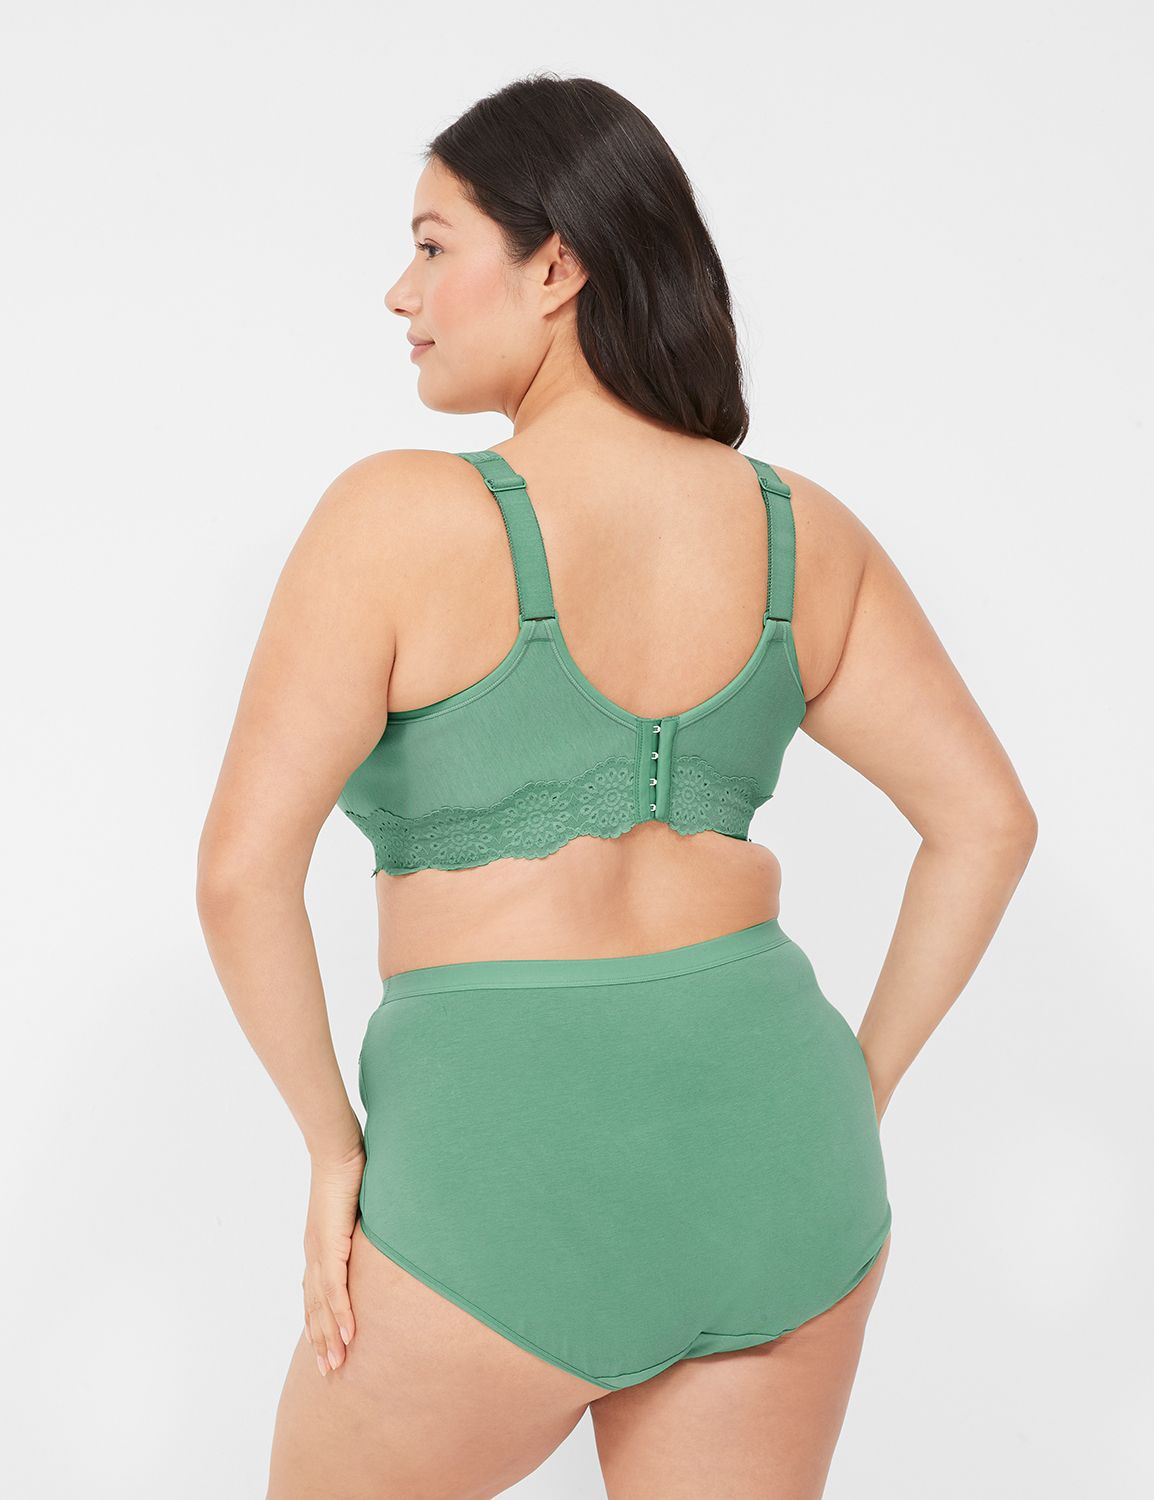 ▷ Cacique green bra with lace sides, women's size 42DD - CENTRO COMERCIAL  CASTELLANA 200 ◁